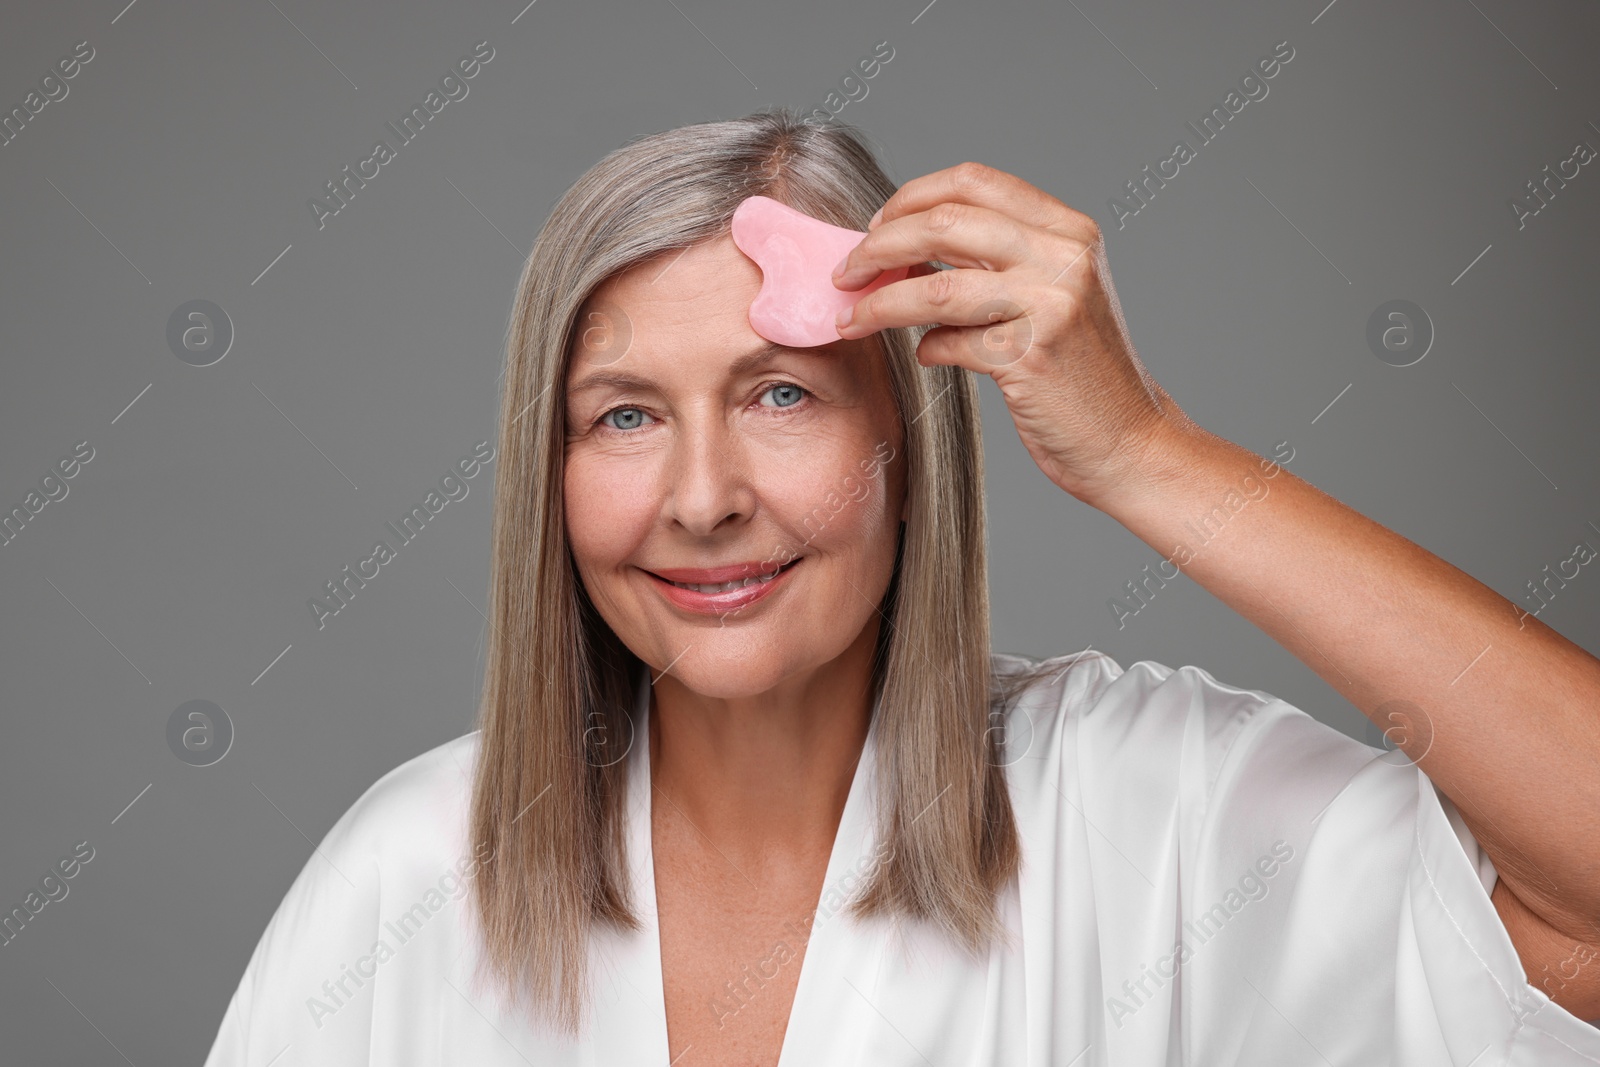 Photo of Woman massaging her face with rose quartz gua sha tool on grey background